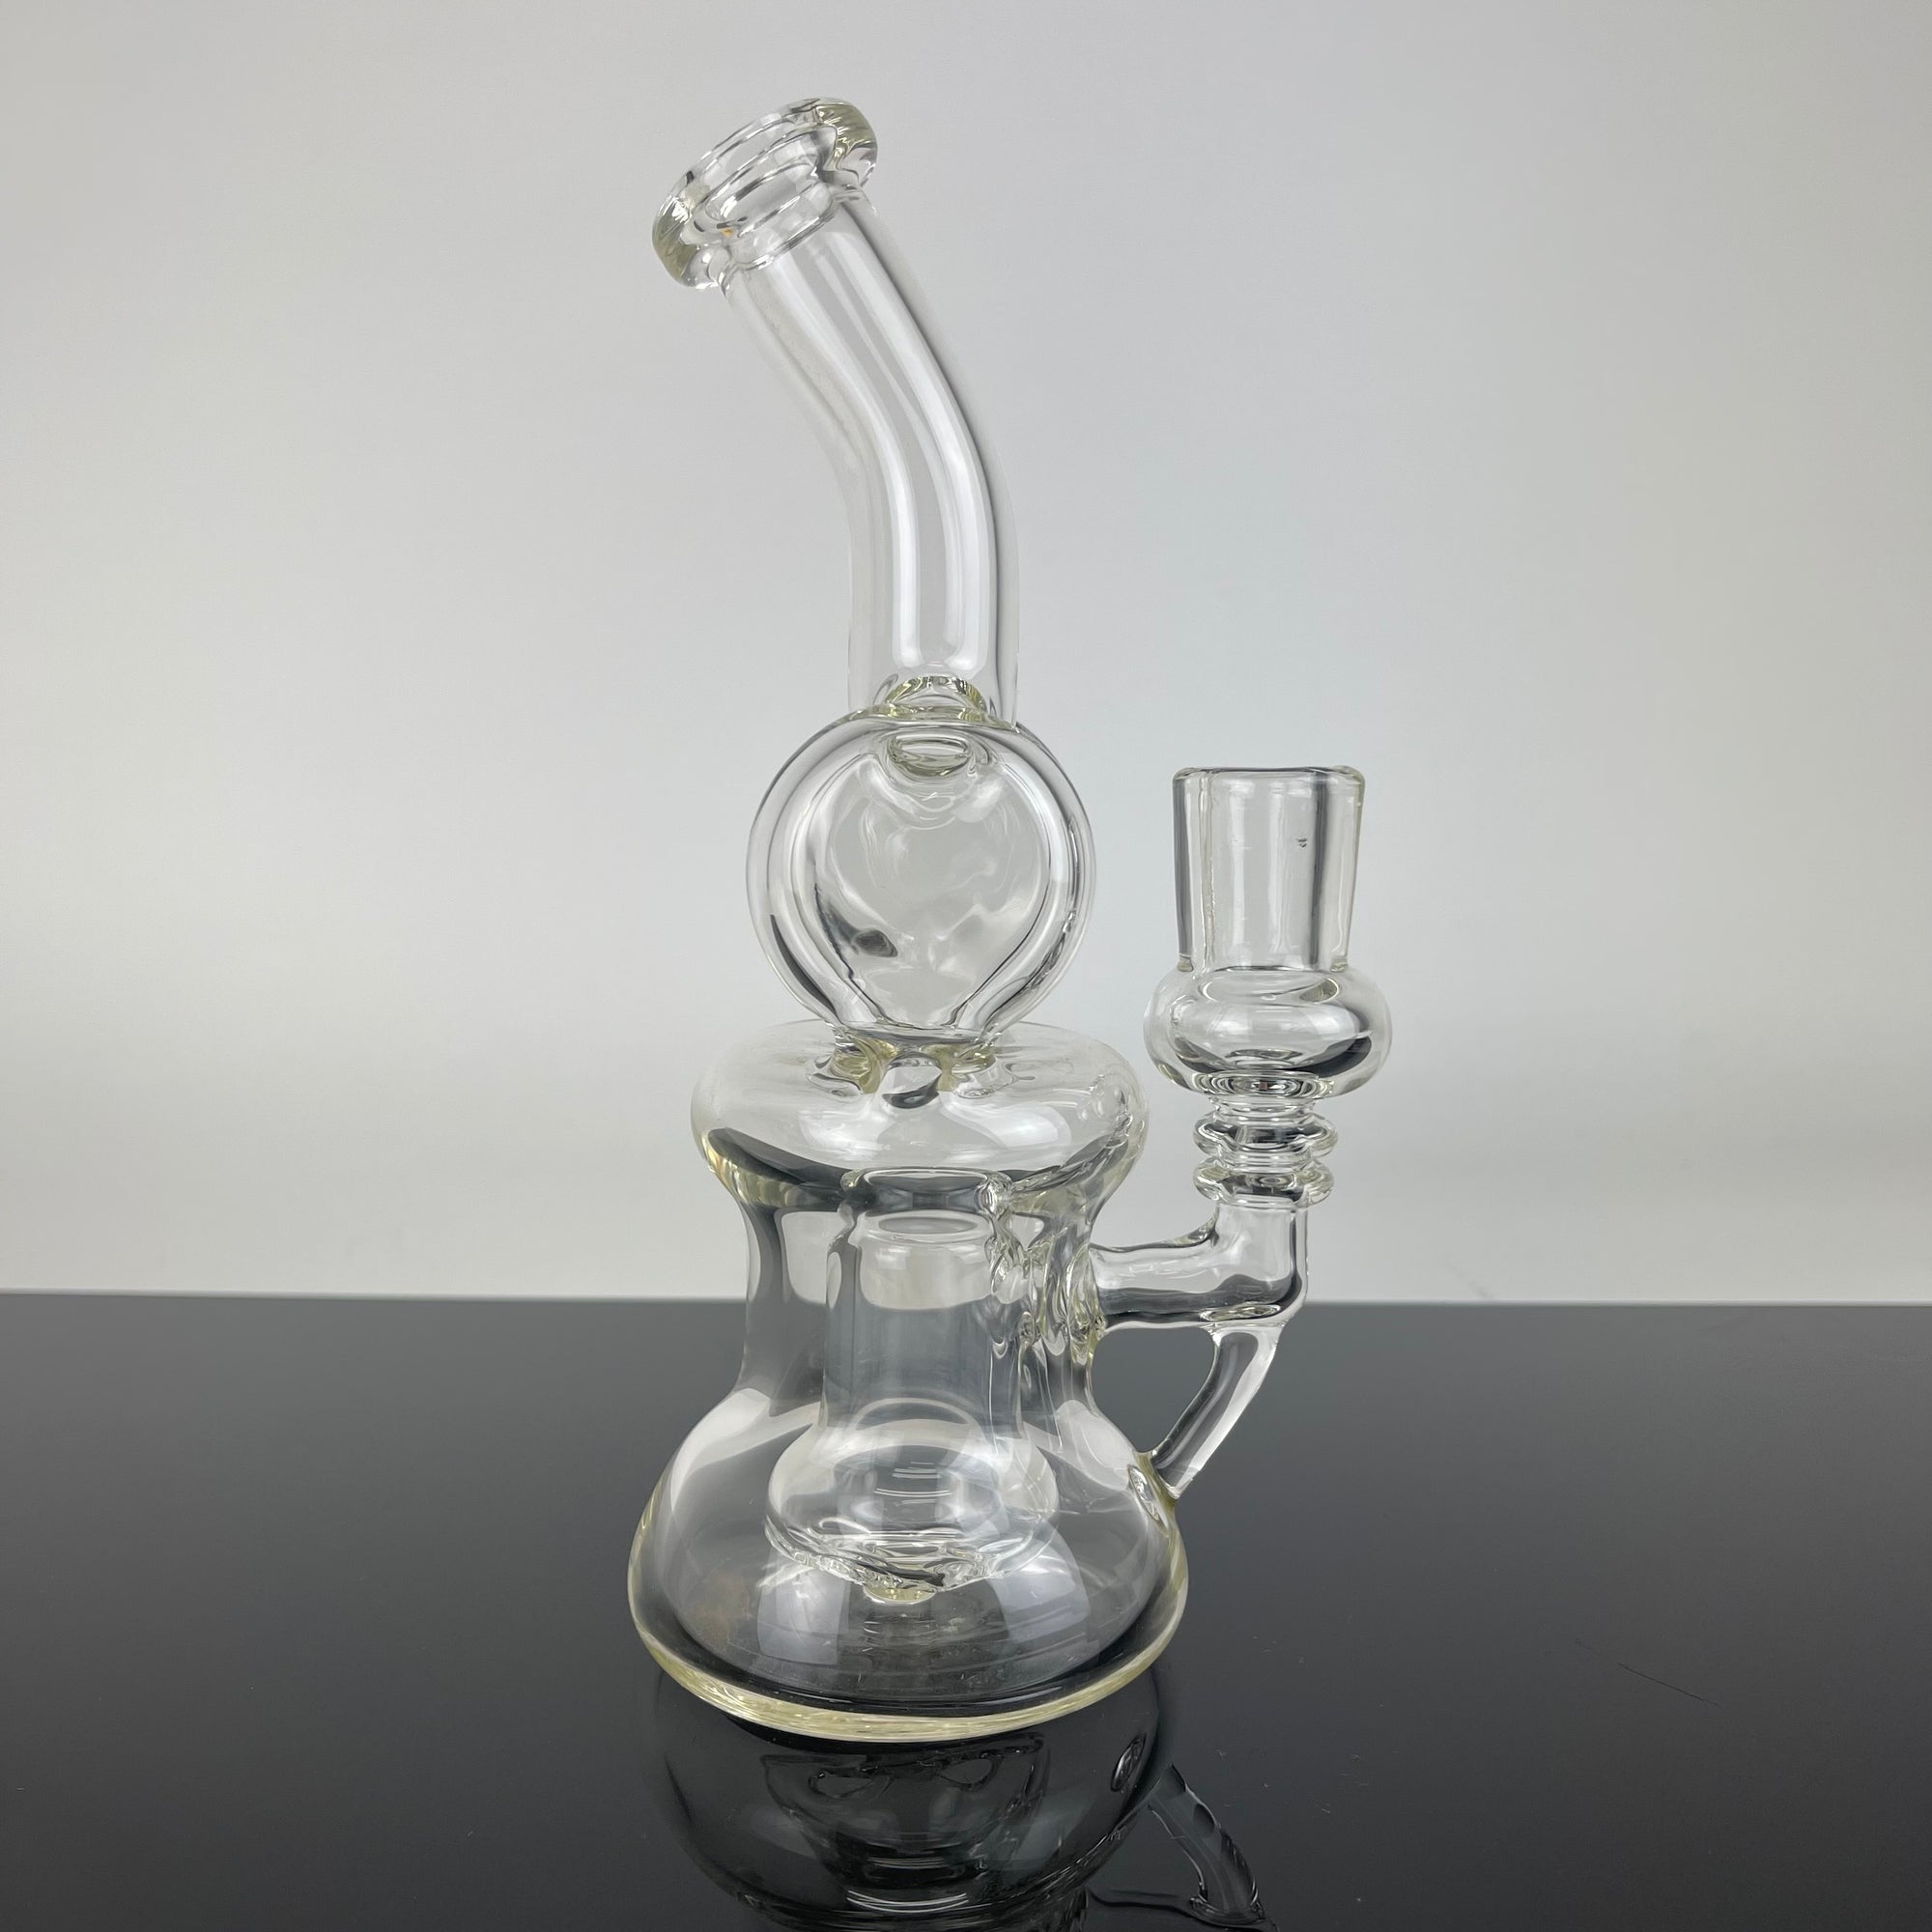 Glass by Mouse Dual Uptake Rig